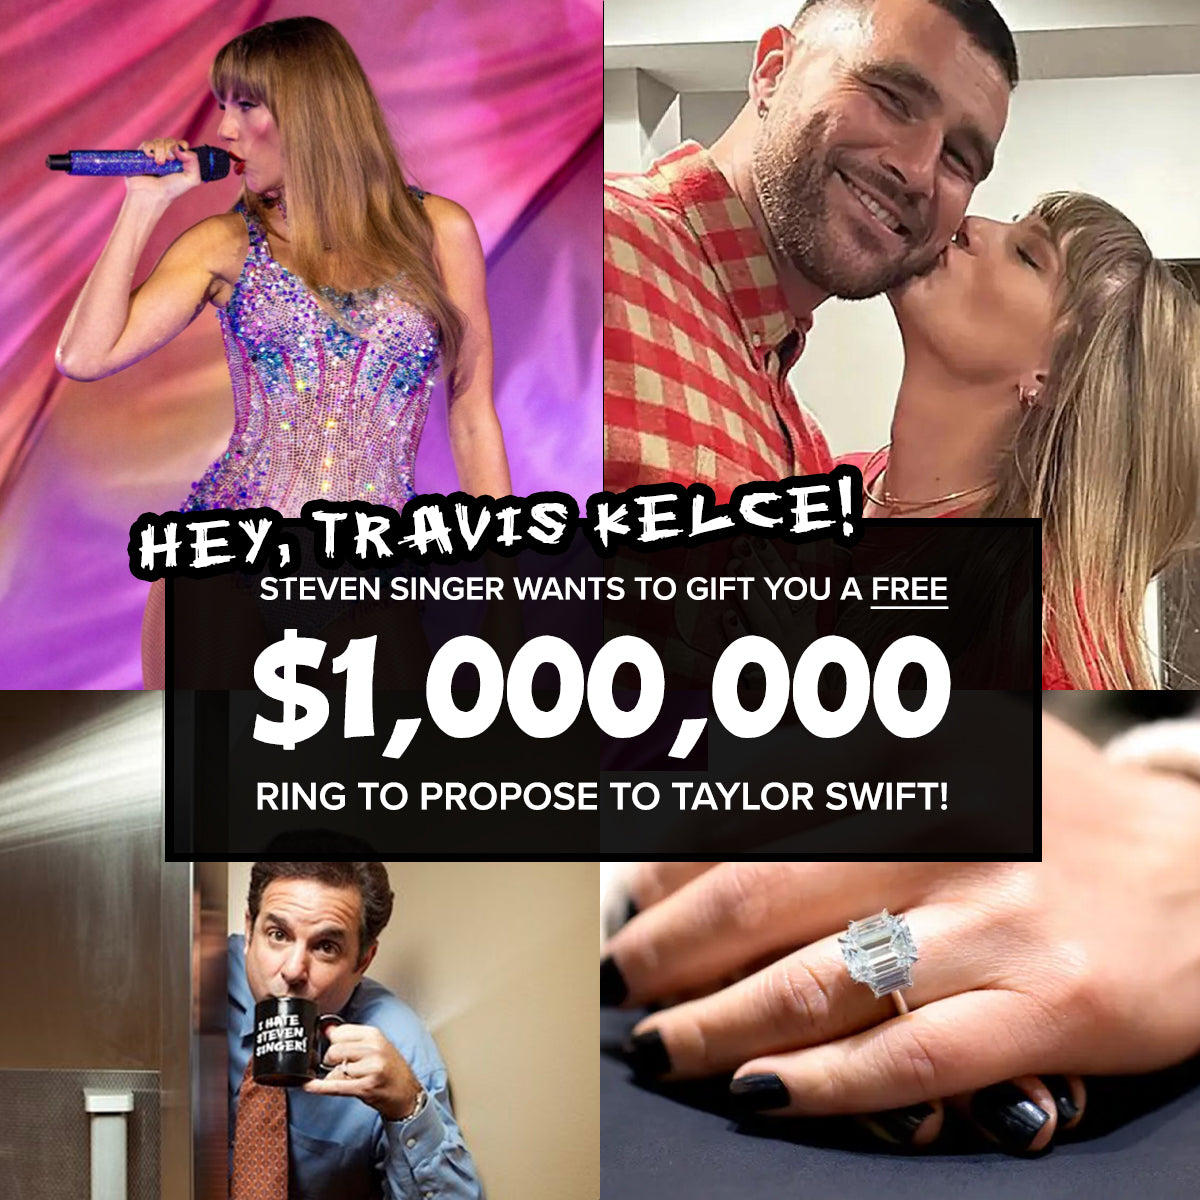 Steven Singer Offers Travis Kelce and Taylor Swift a $1 million Engagement Ring for Free!